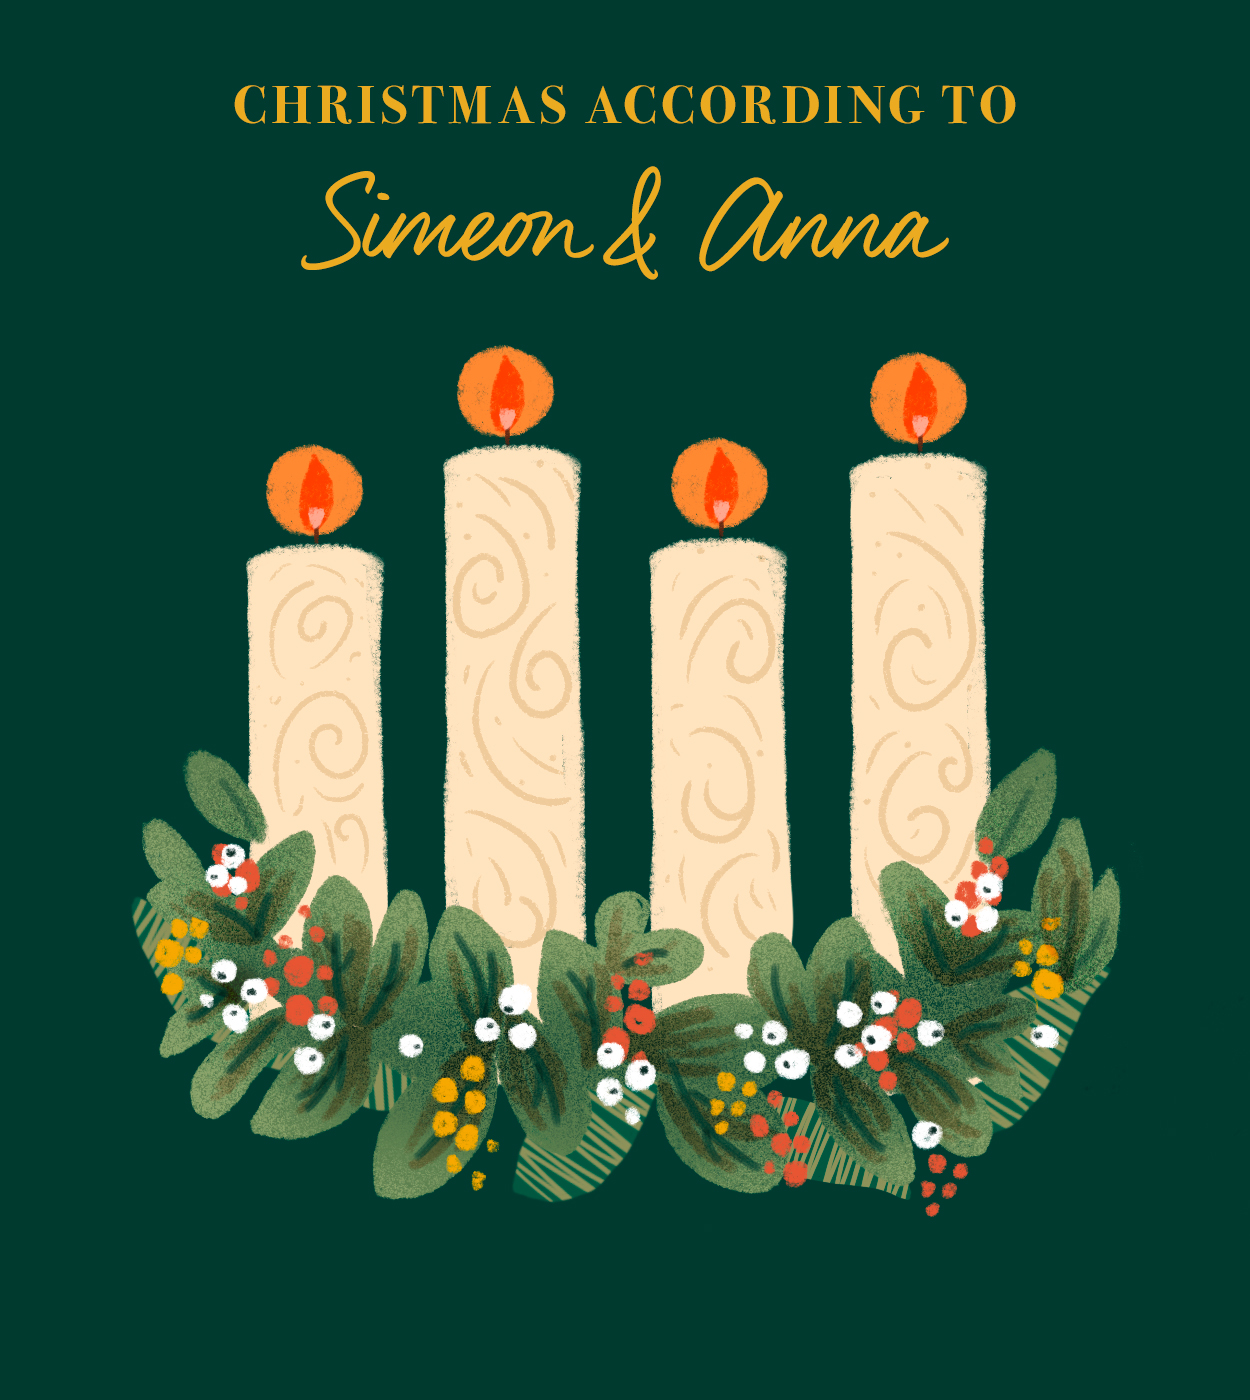 The Fourth Sunday of Advent – Luke 2:22-38 – Christmas According to Simeon and Anna